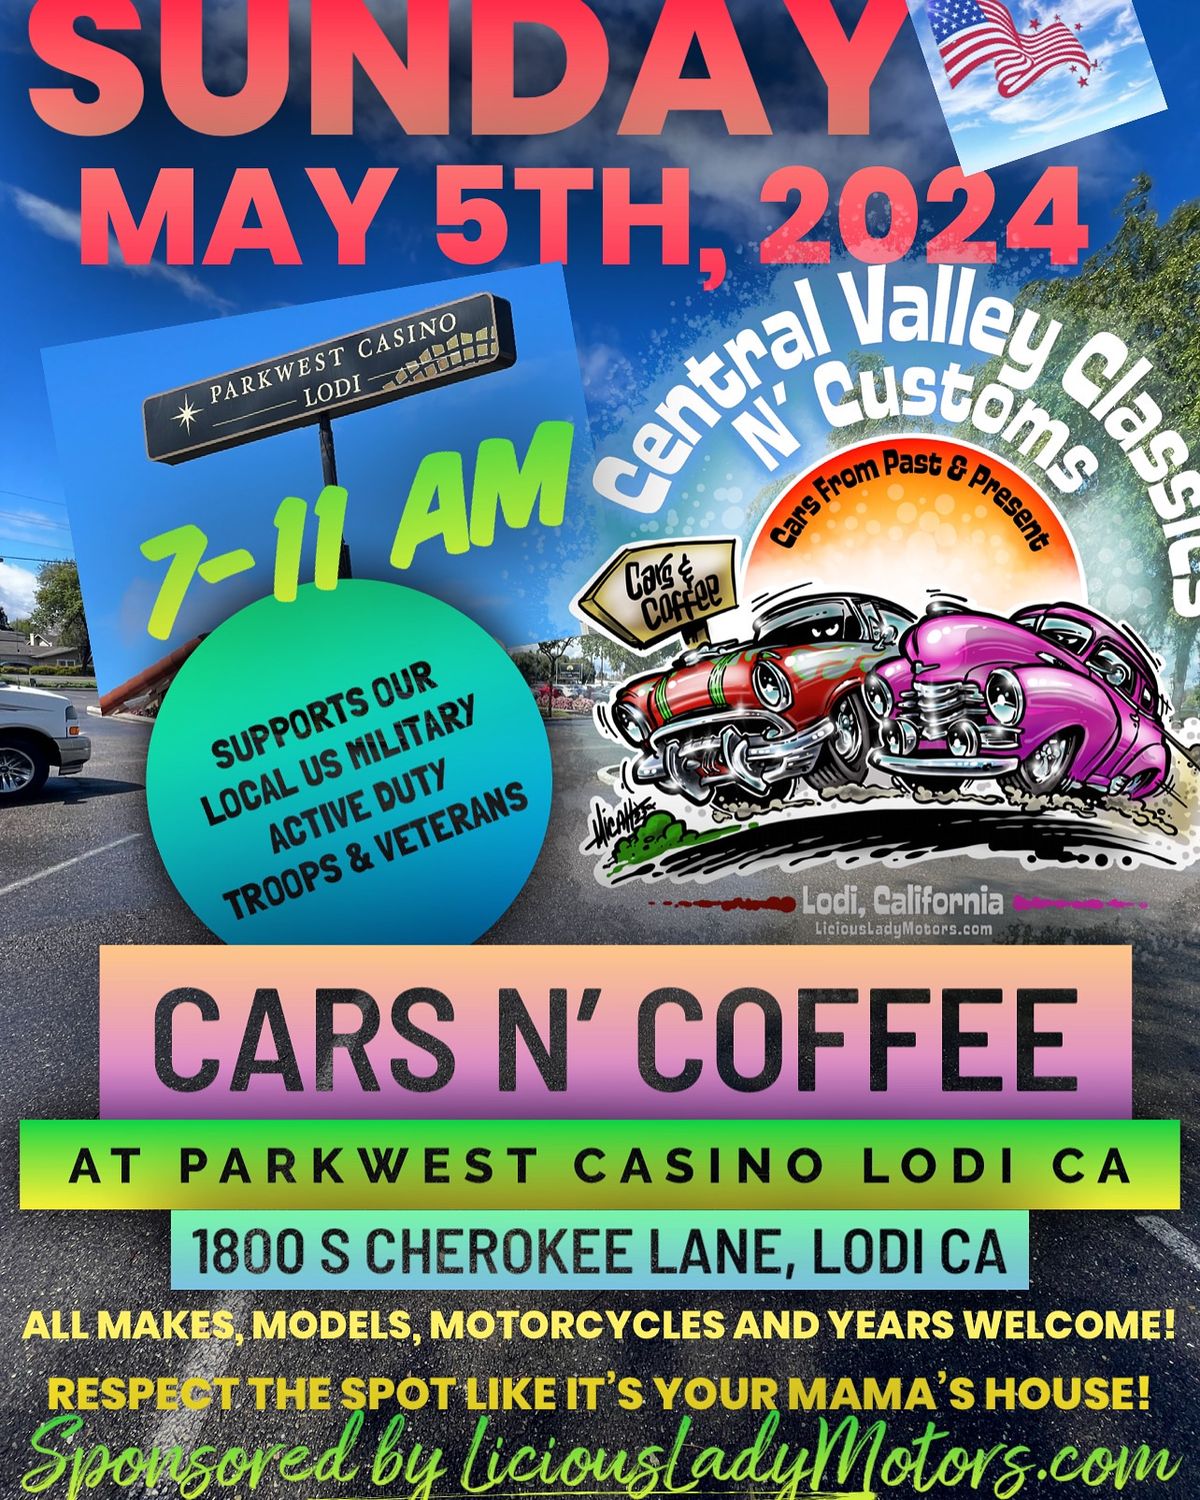 Central Valley Classics and Customs Carsandcoffee!